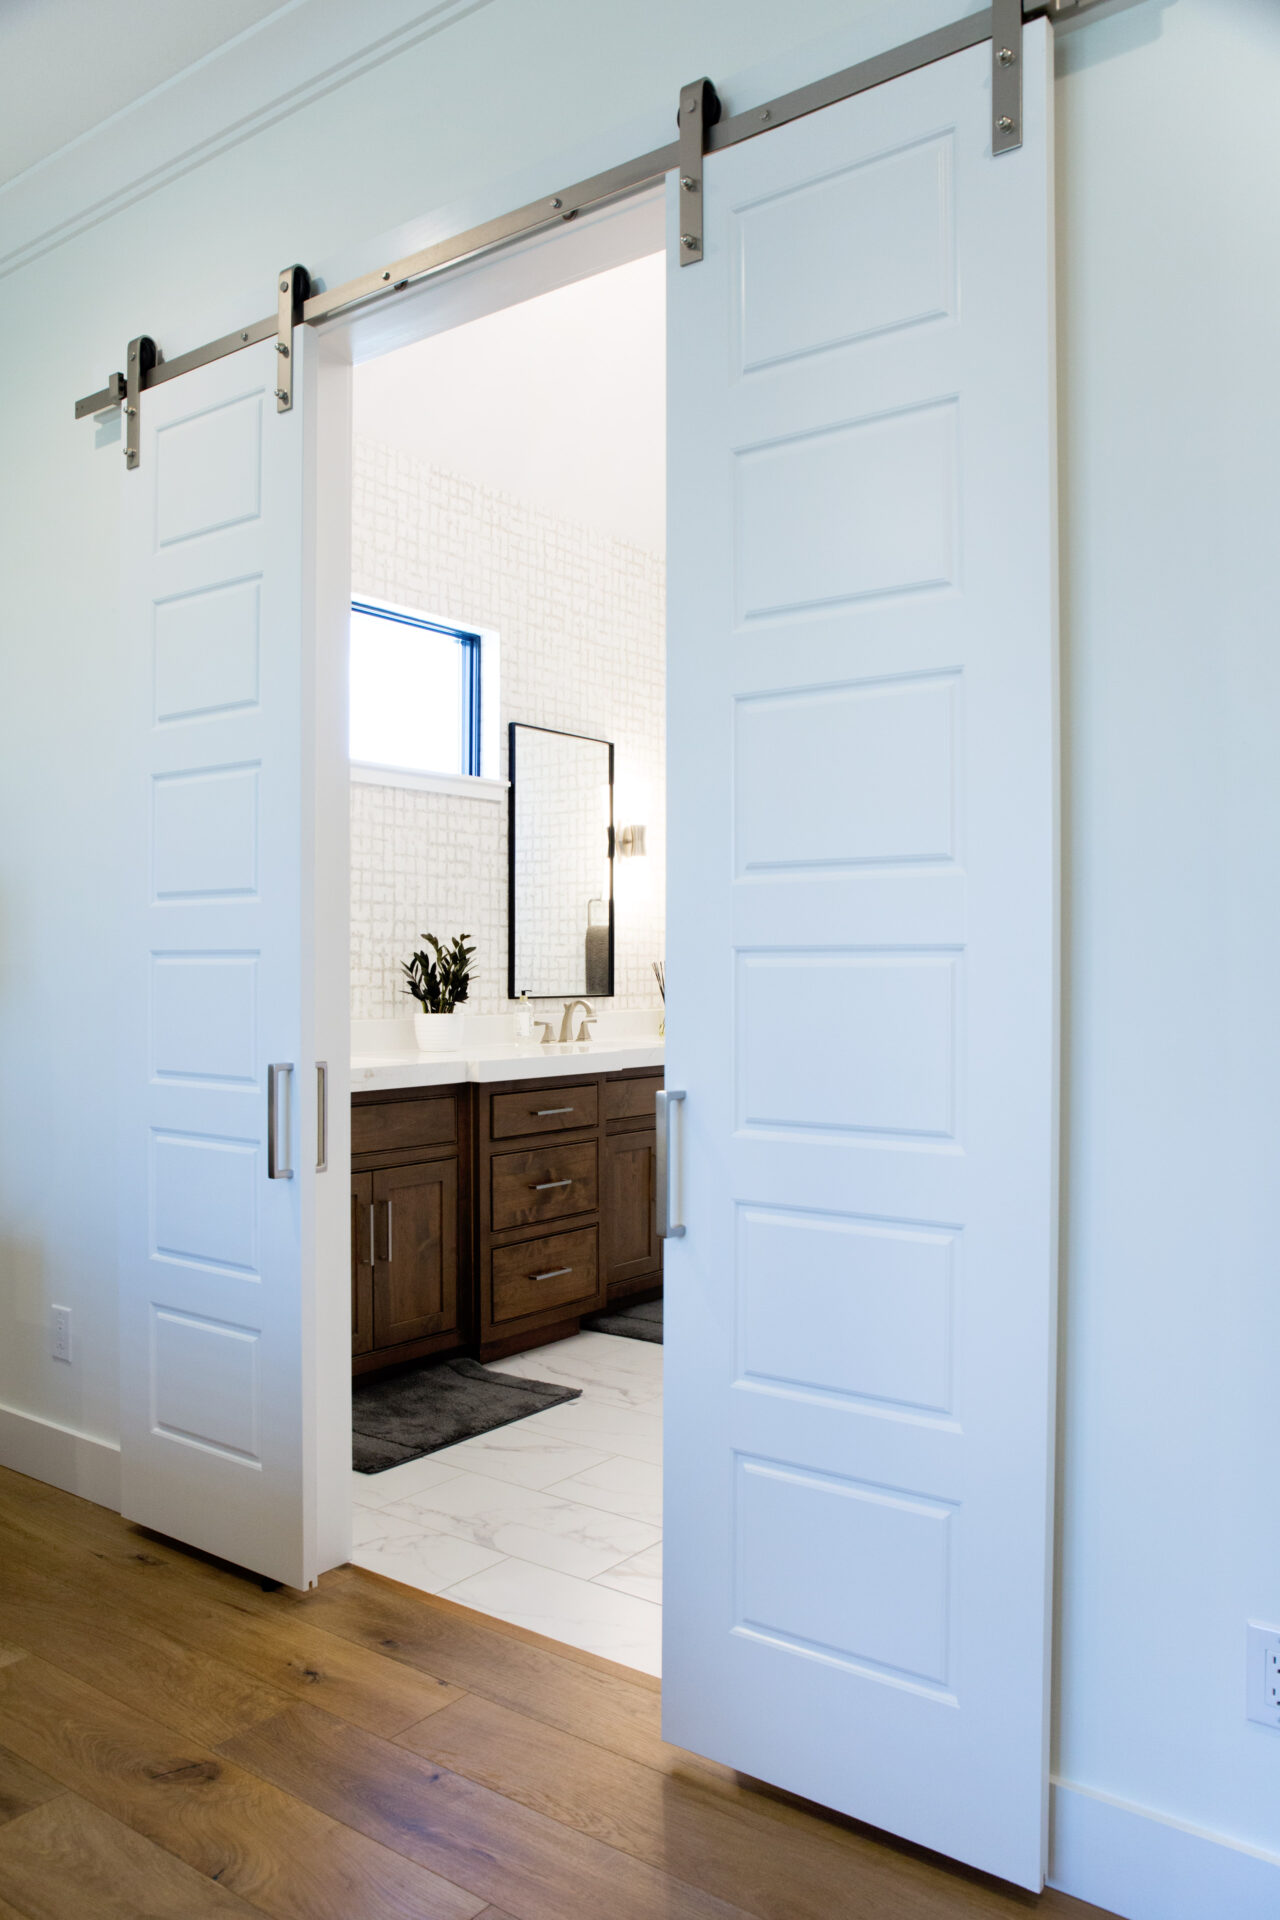 A bathroom with two sliding doors